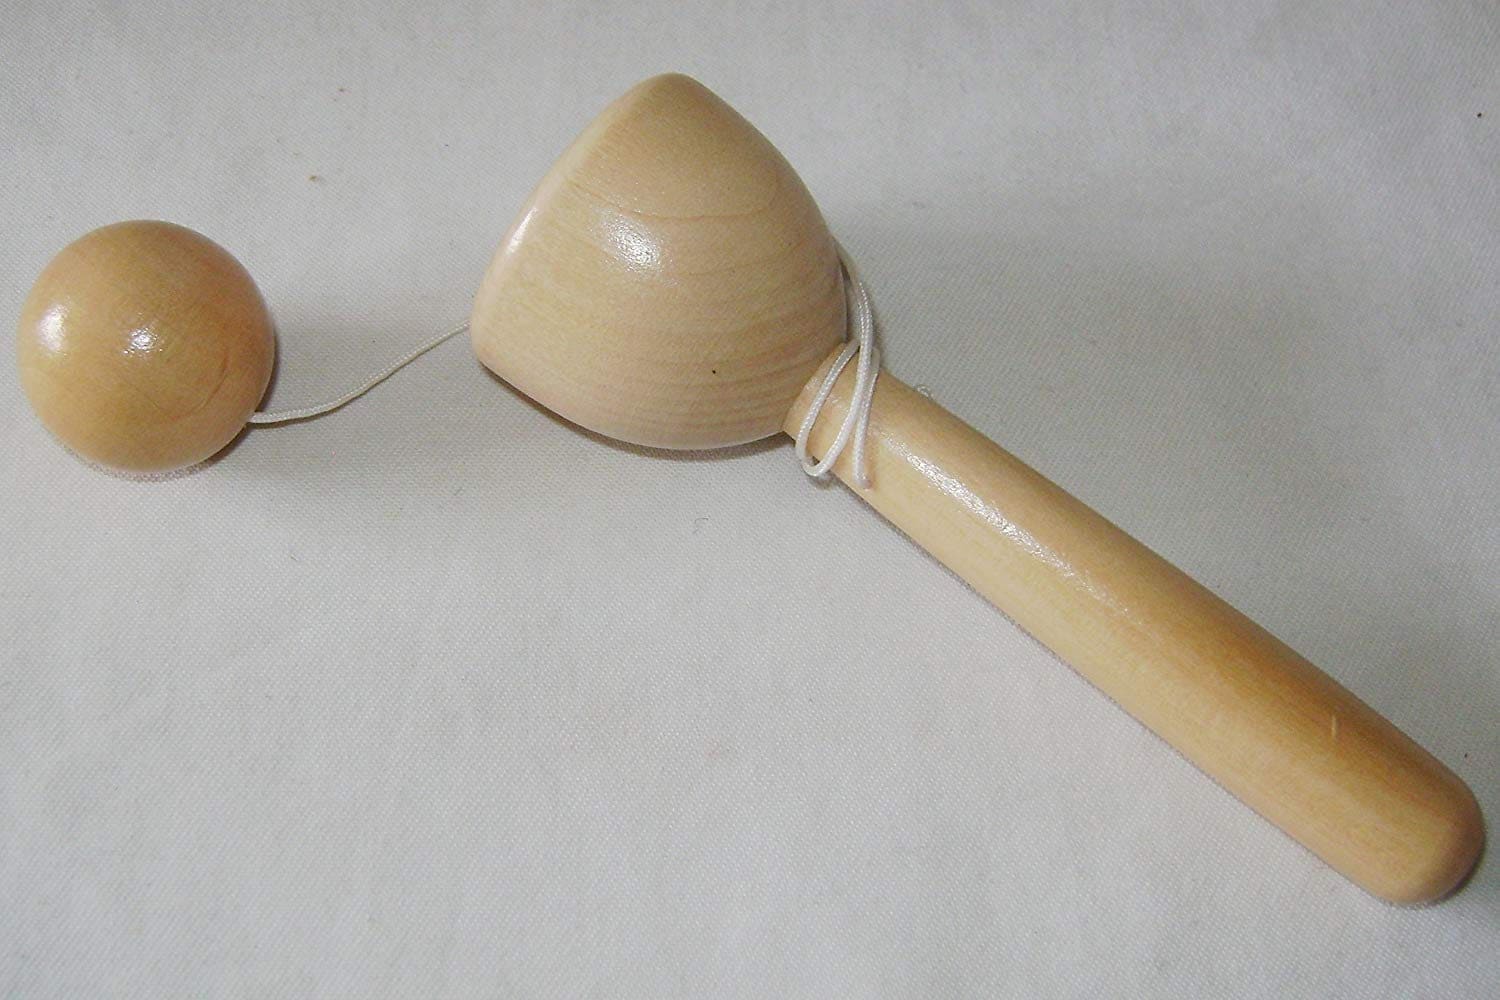 Pocket Bilboquet, Wooden Cup and Ball, Mader - Skill Toys